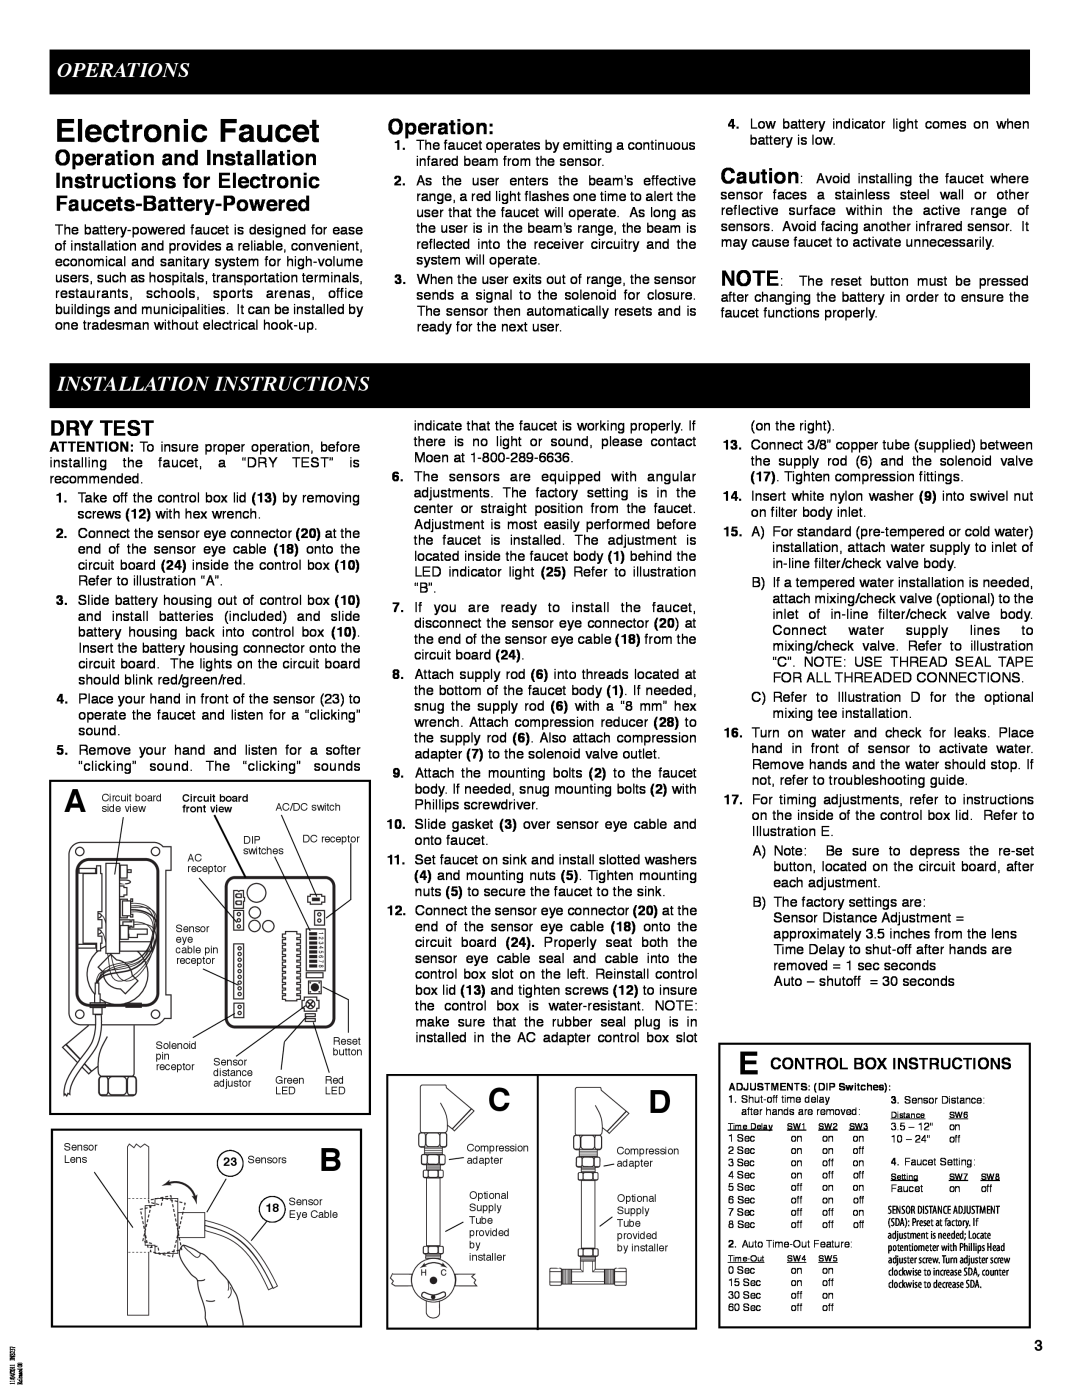 Moen 8301 manual Electronic Faucet, Operations, Operation and Installation Instructions for Electronic, Dry Test 